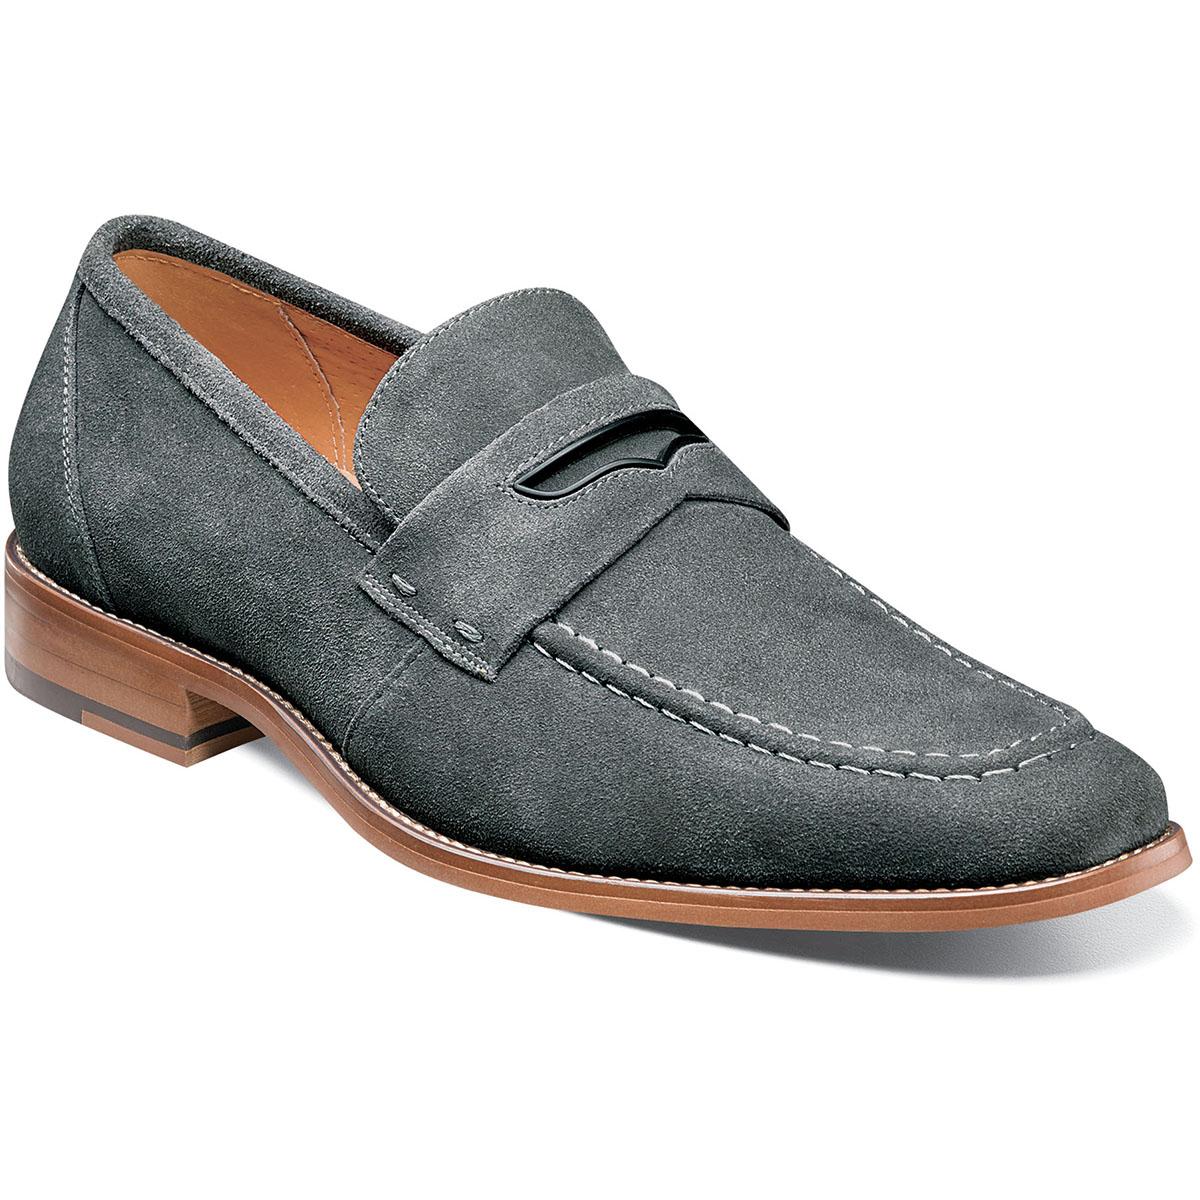 Stacy Adams Colfax Grey Calfskin Suede Moc Toe Penny Loafers 25205-061 ...